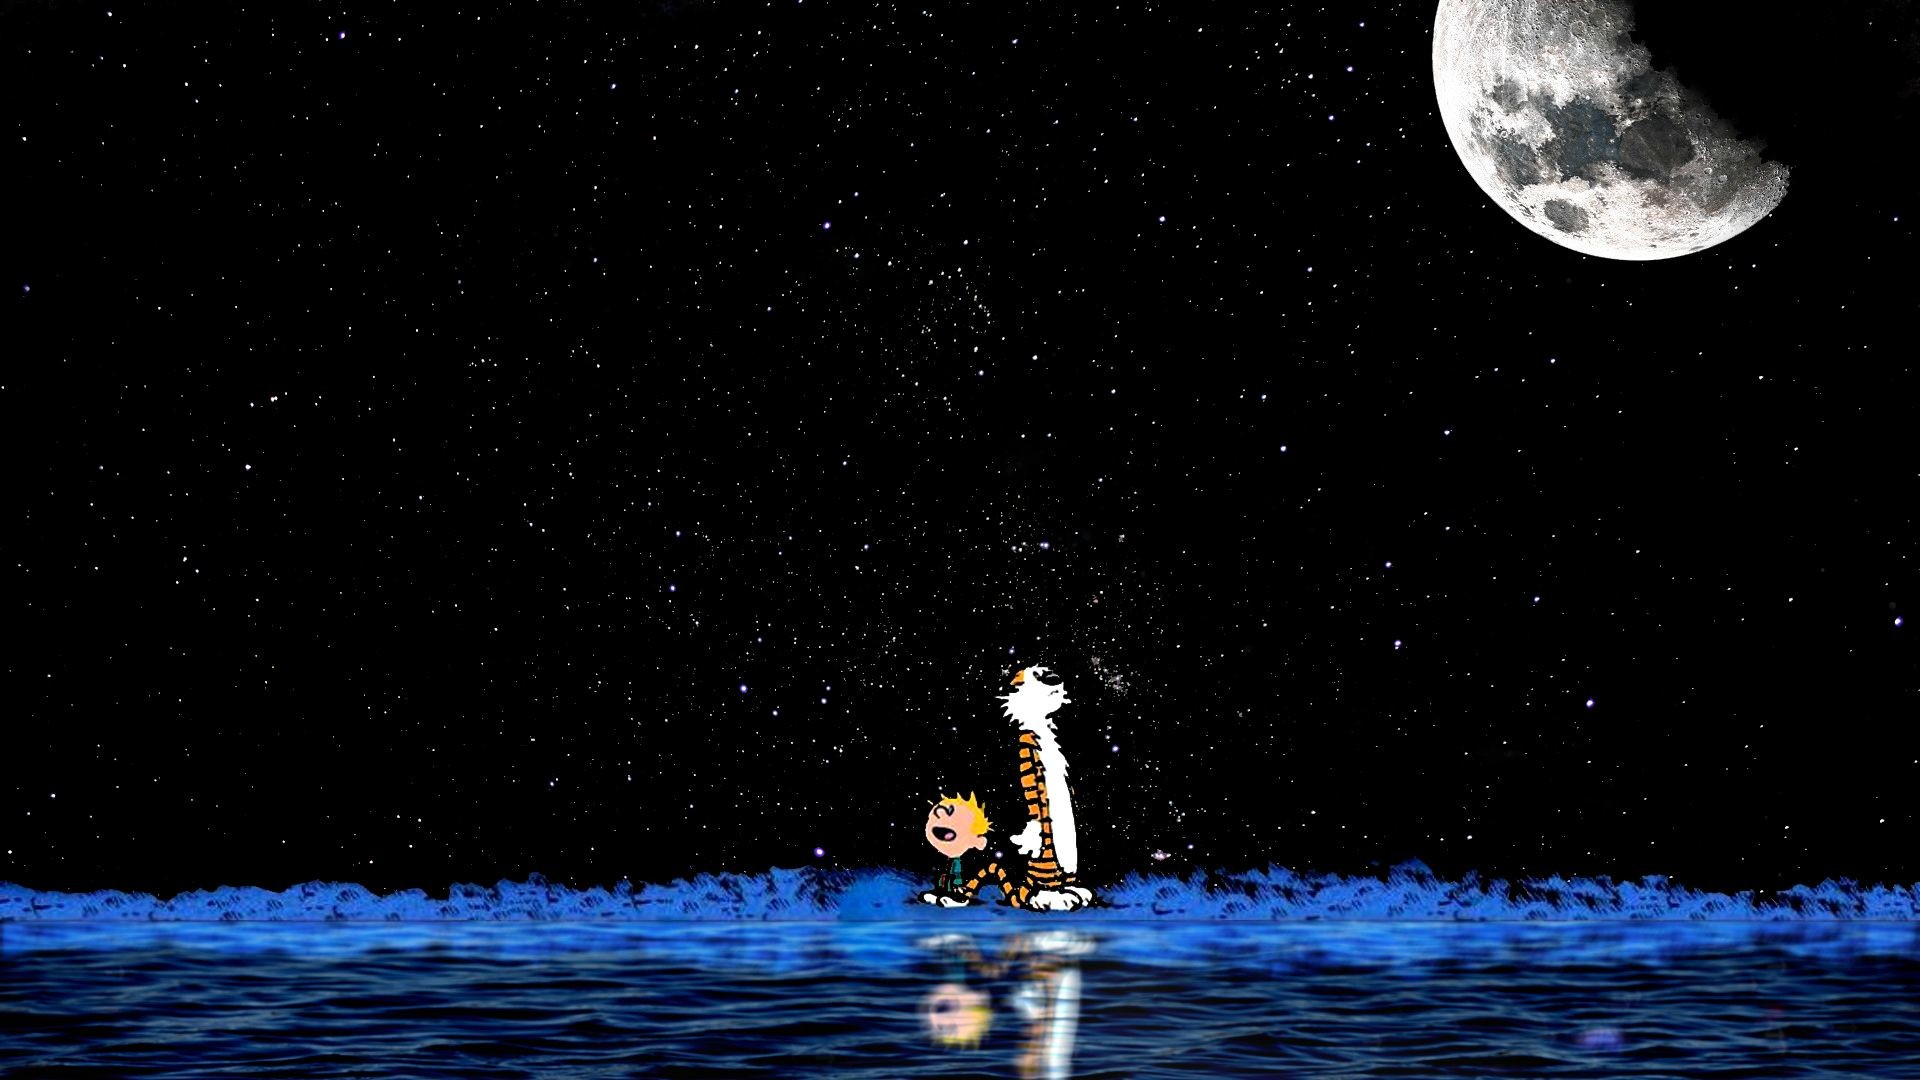 1920x1080 ... calvin and hobbes wallpaper - Page 3 of 3 - hdwallpaper20.com ...